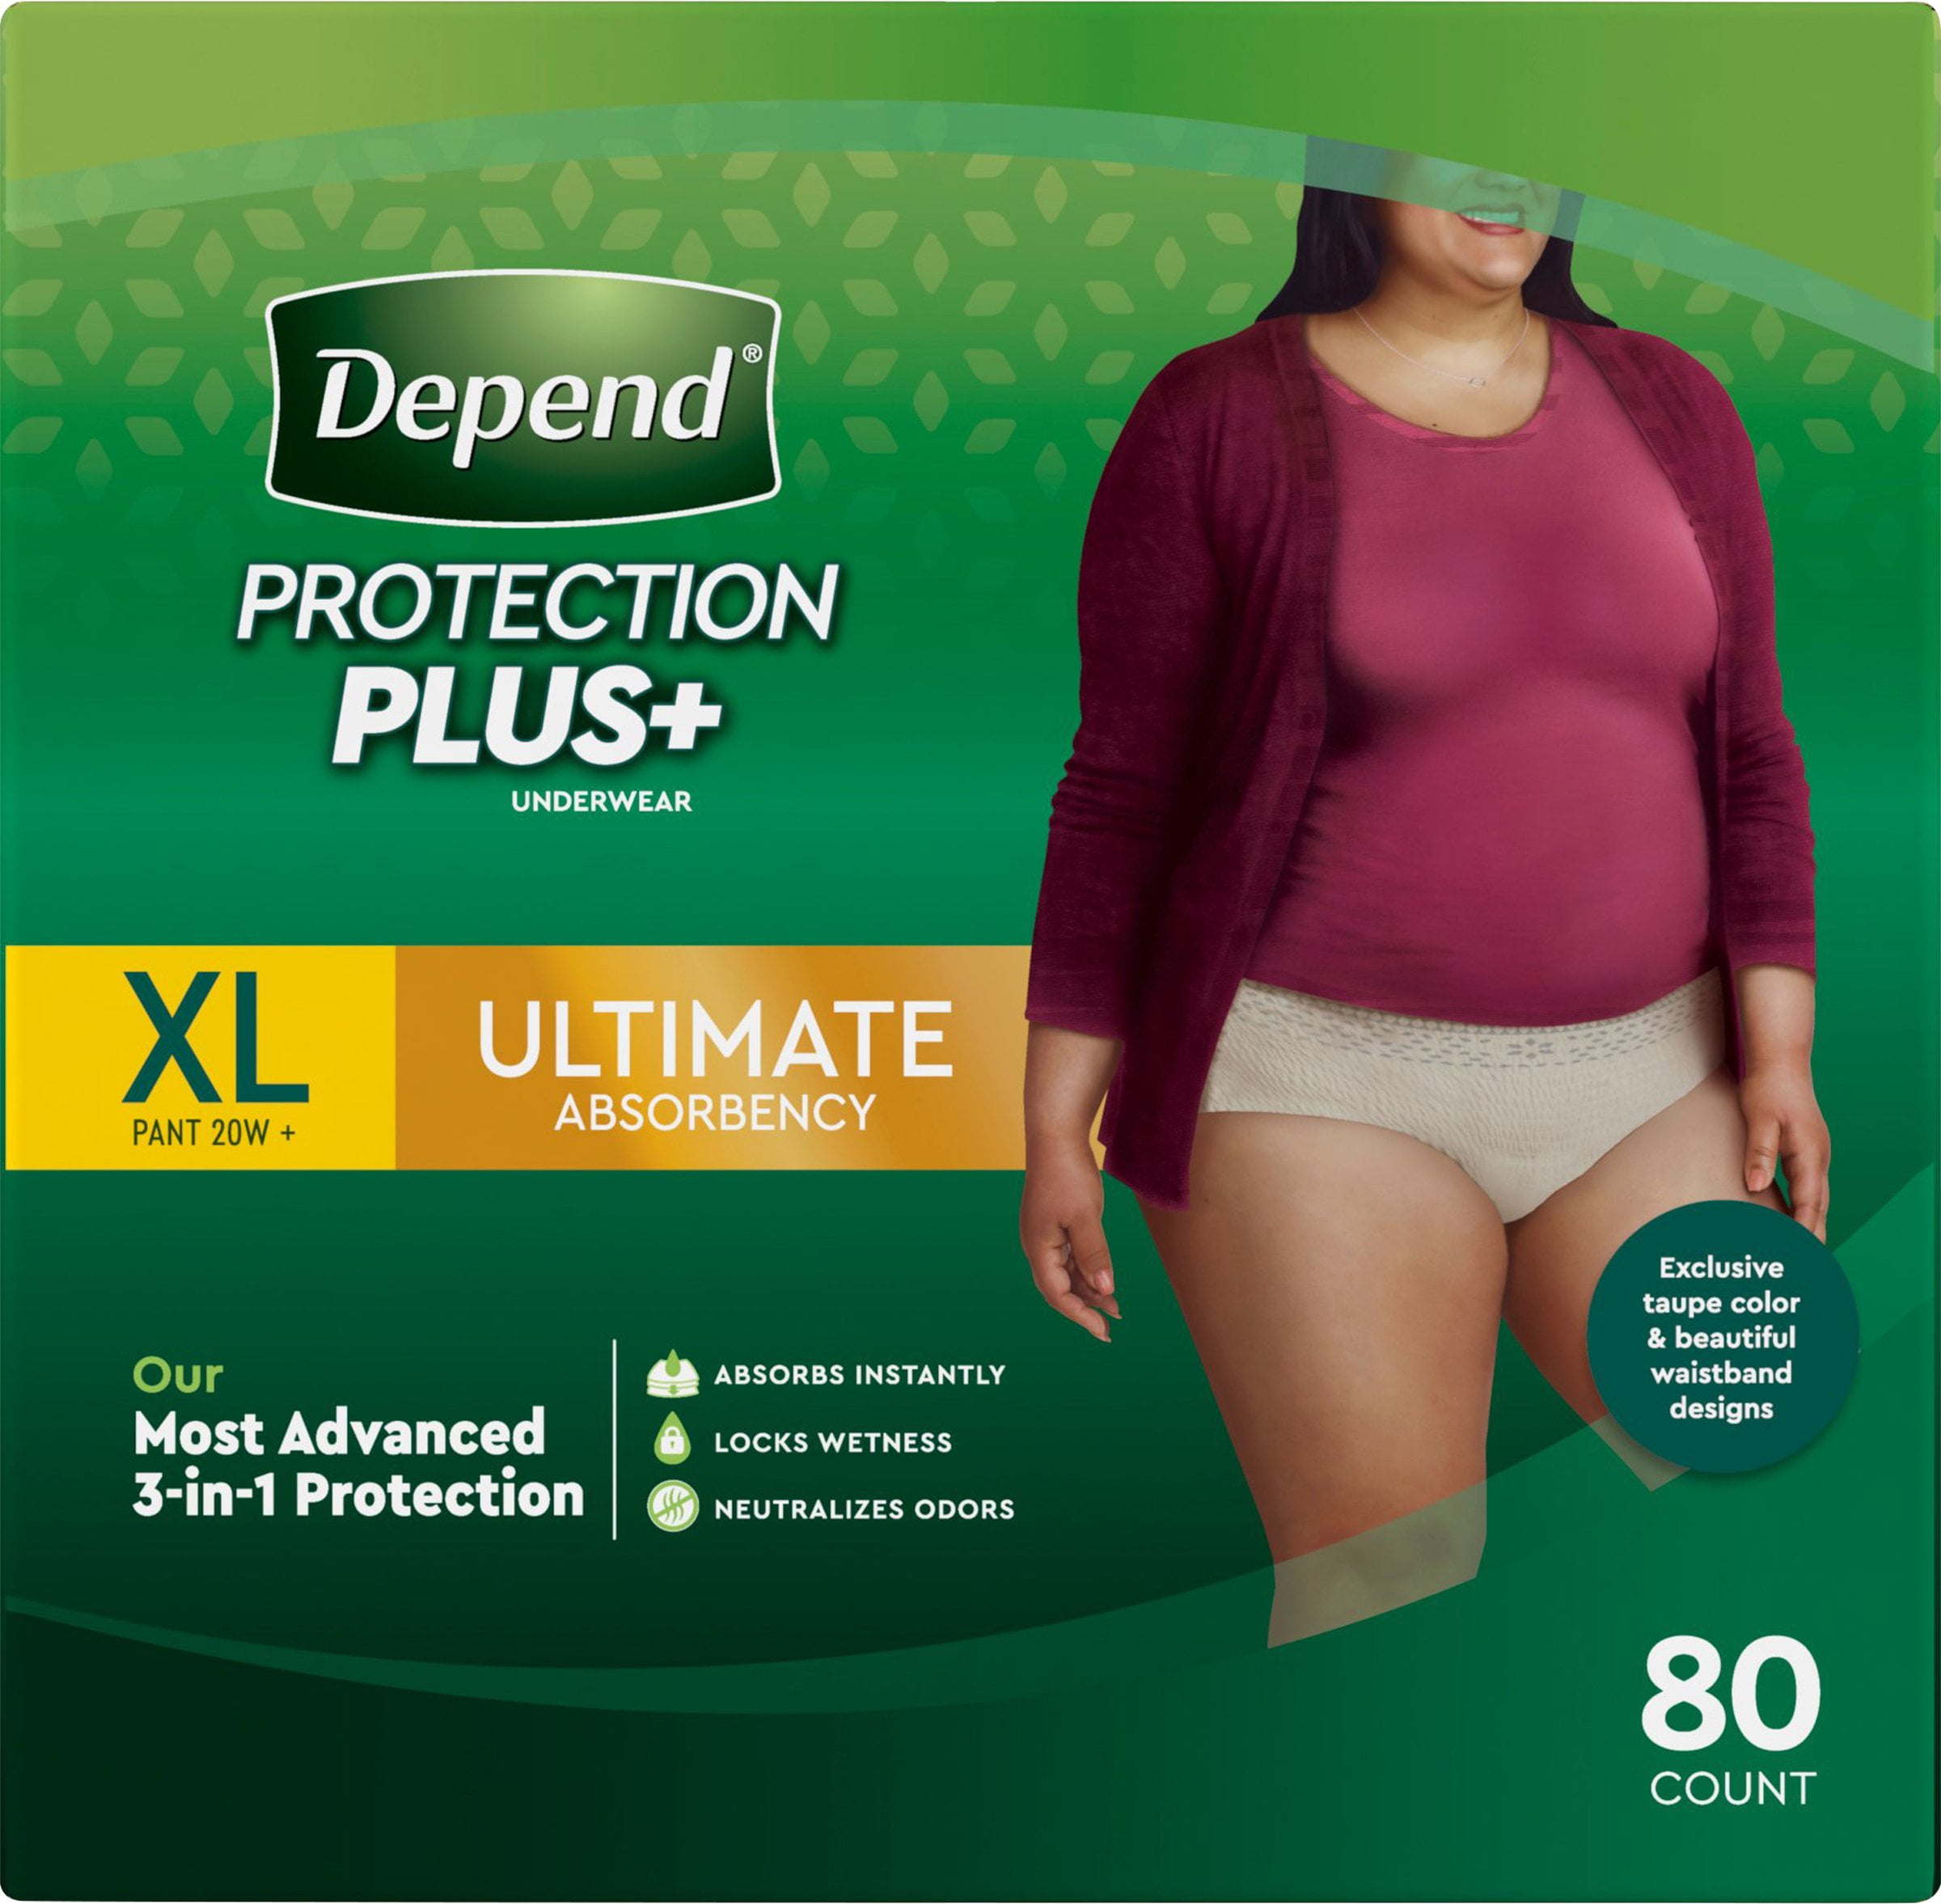 Depend Protection Plus Ultimate Underwear for Women, XL (80 Count